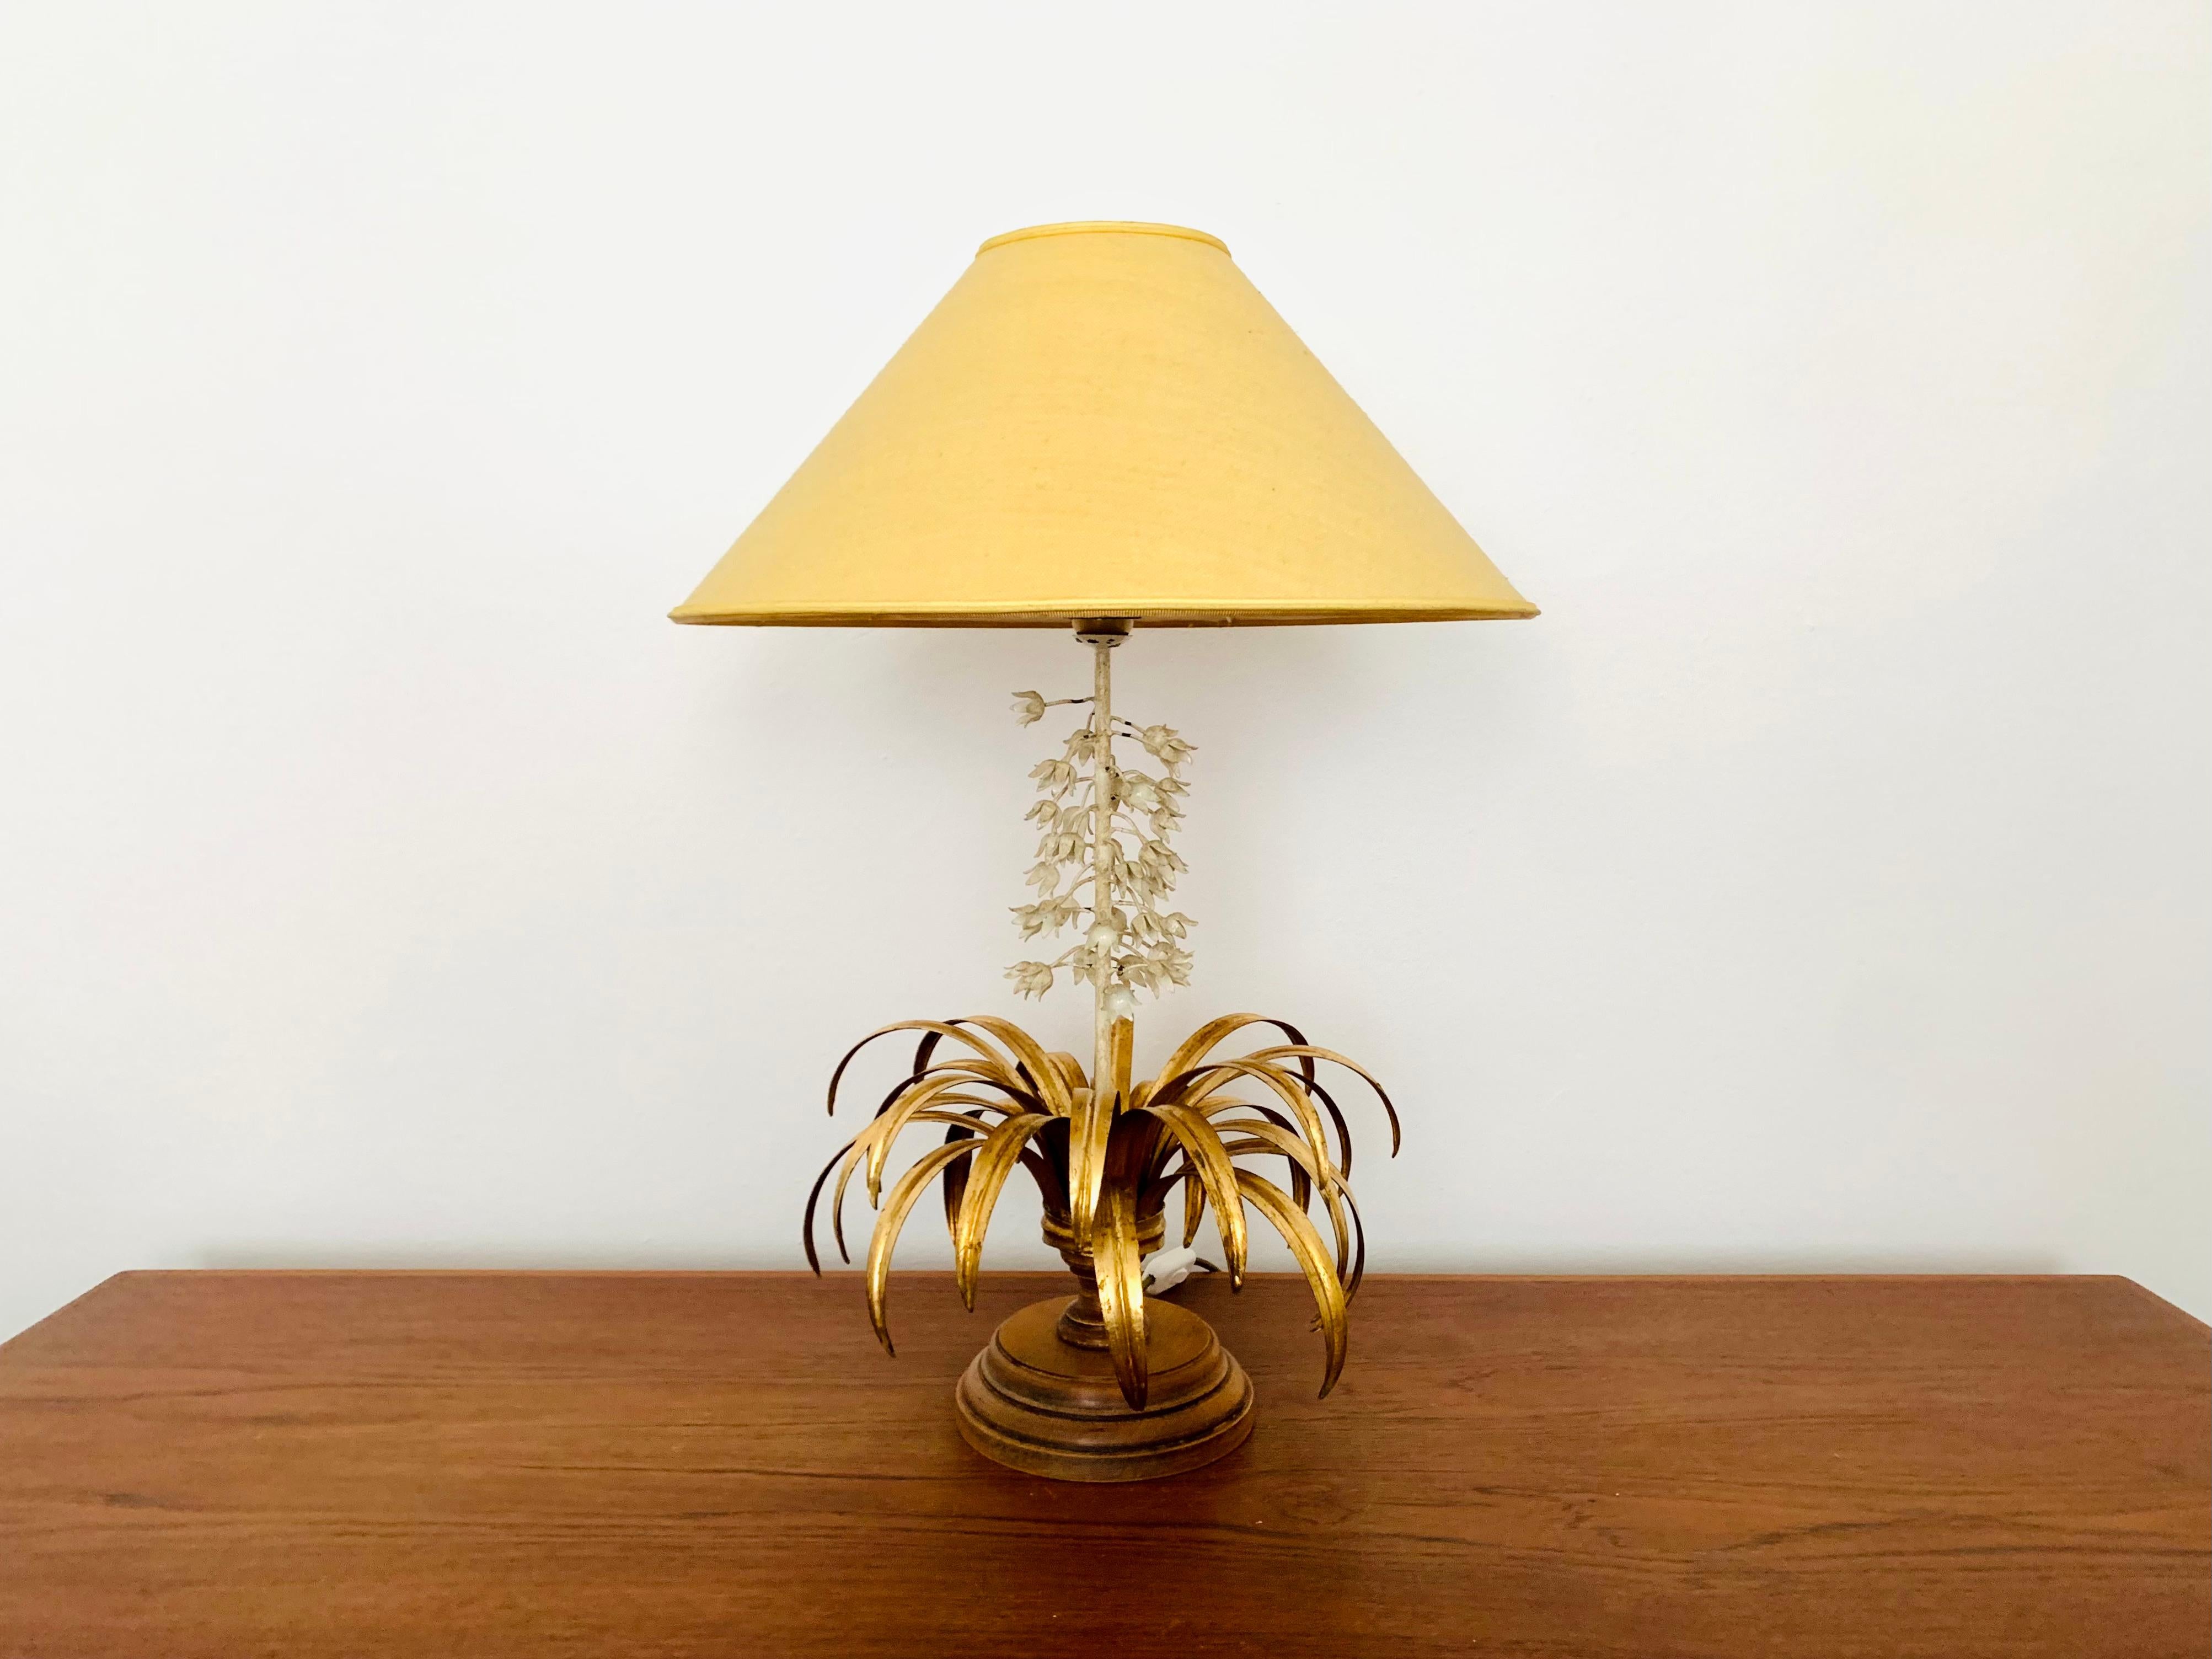 Very nice gilded table lamp by Hans Kögl from the 1970s.
Great design and high-quality workmanship.
A wonderful light emerges.

Condition:

Very good vintage condition with slight signs of wear consistent with age.
Spot patina and loss of